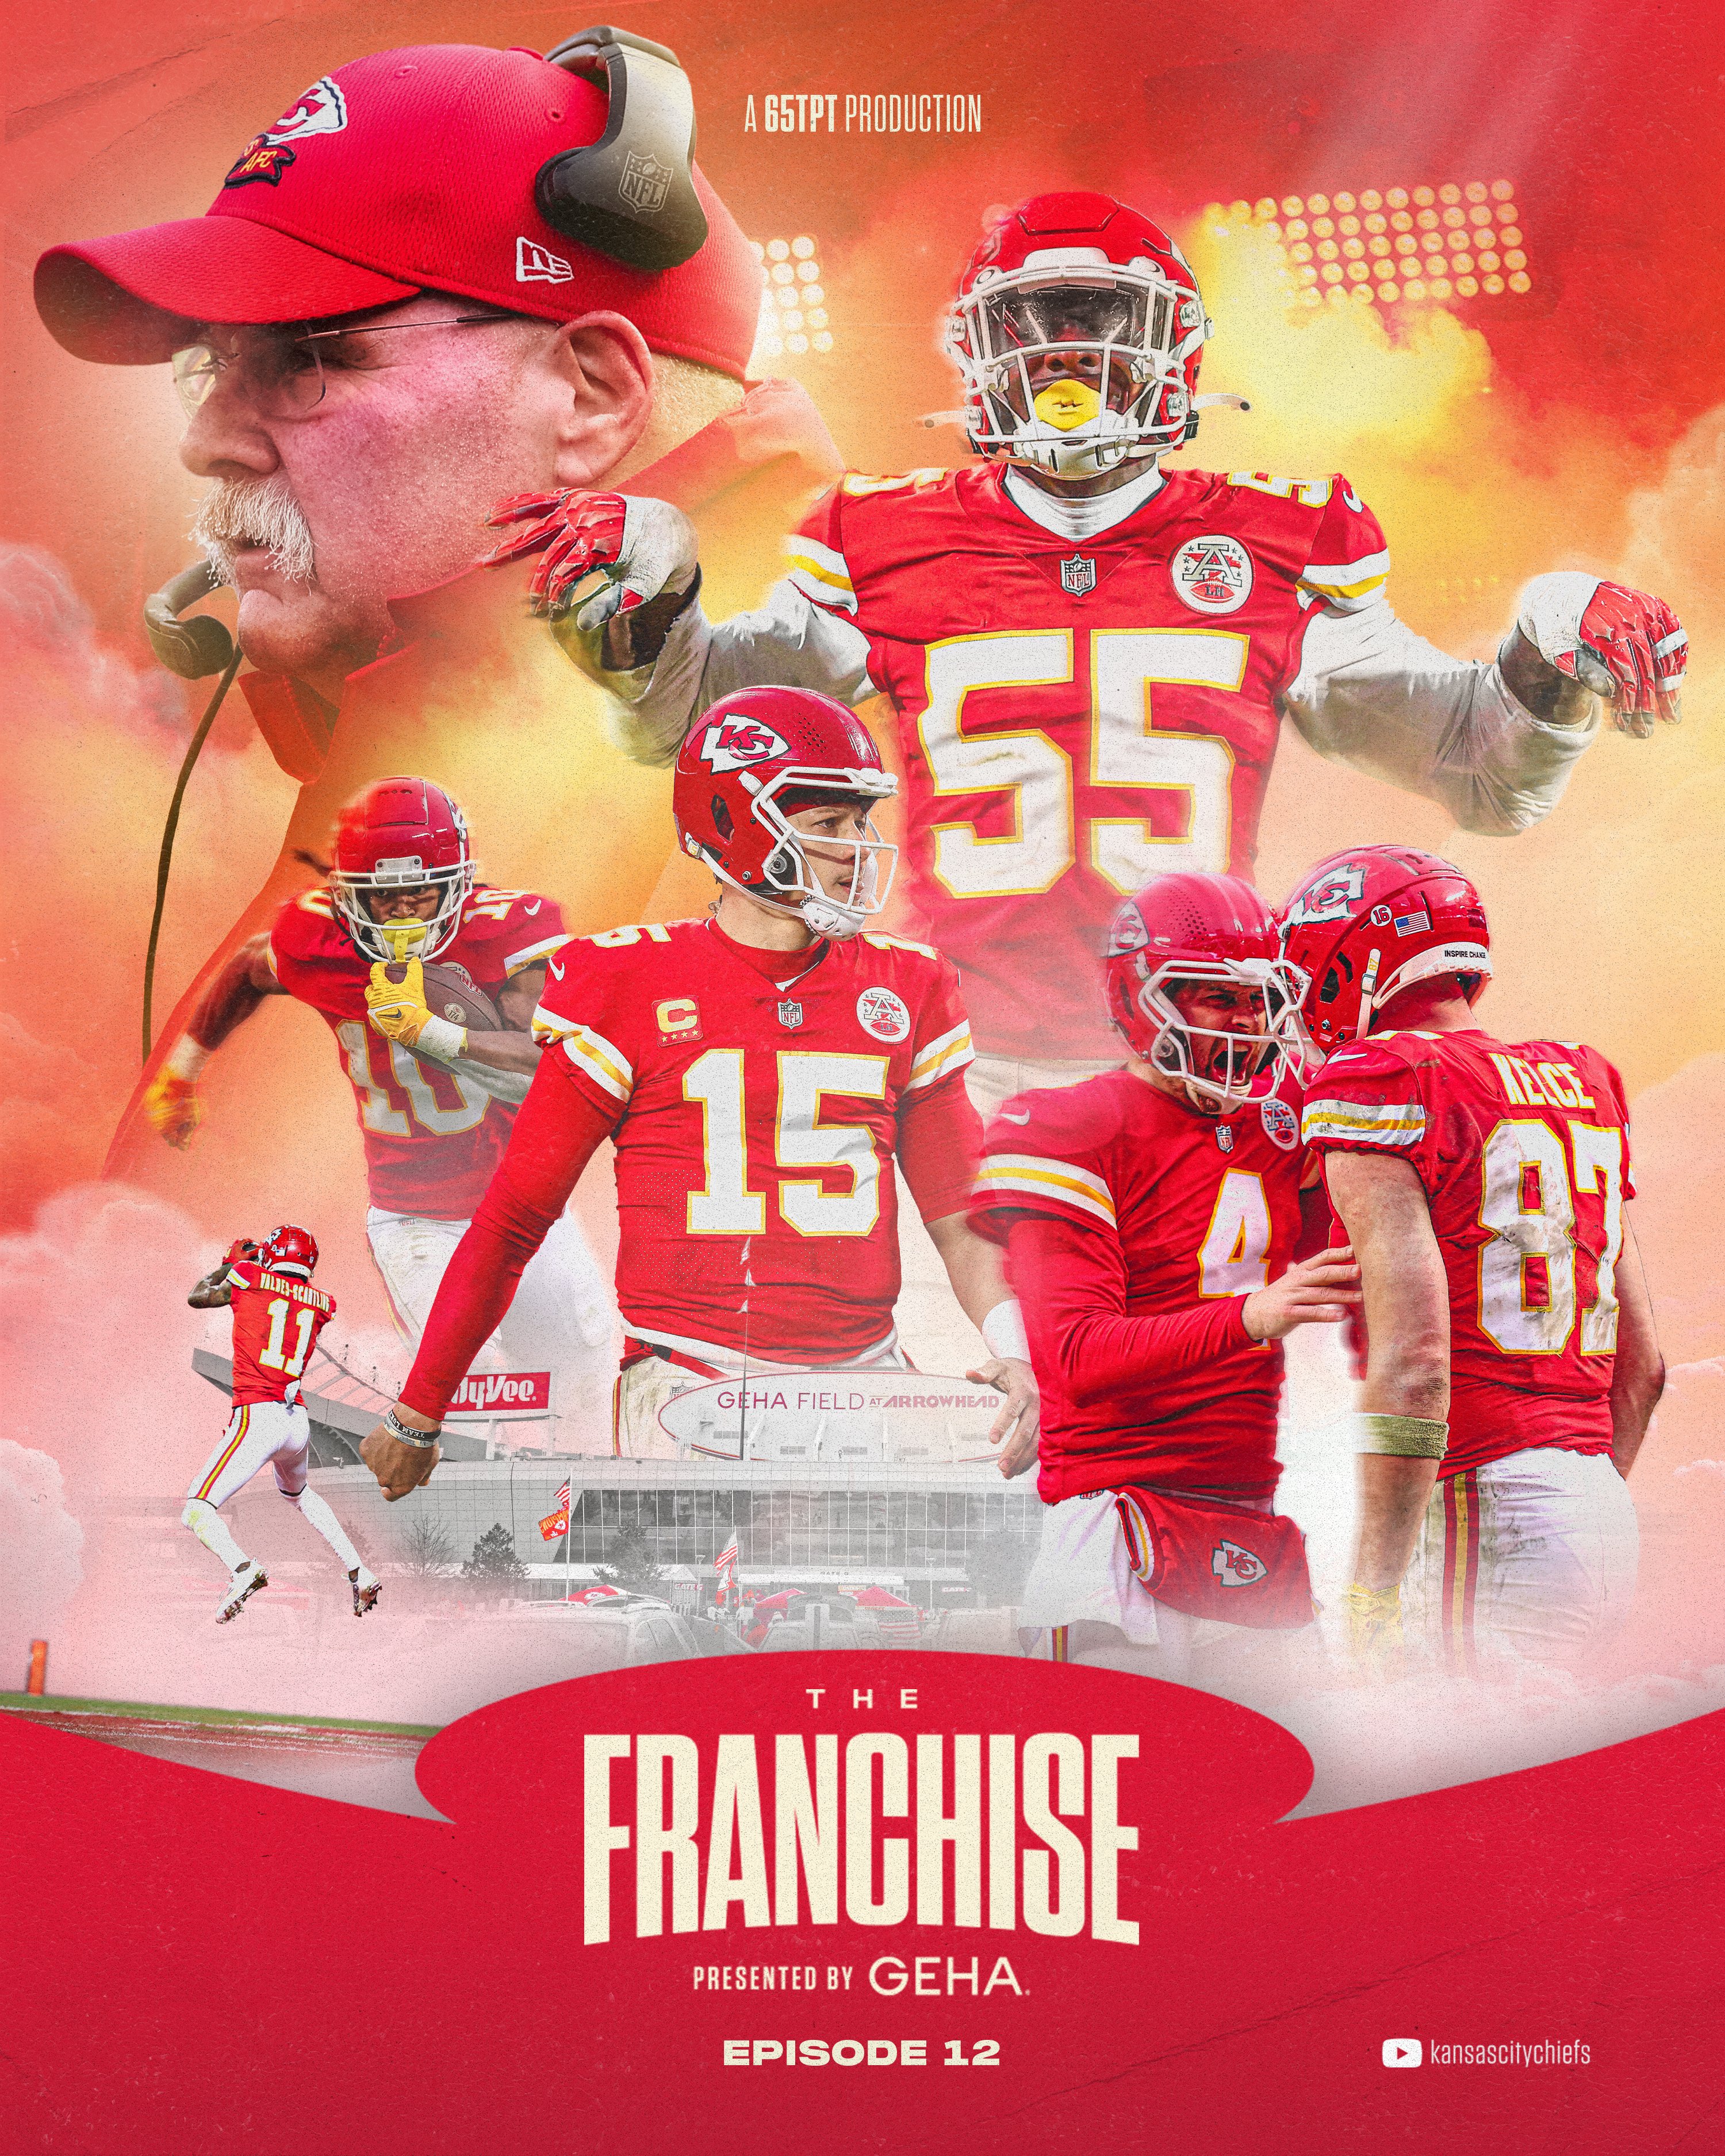 Kansas City Chiefs football. New episode of The Franchise presented by GEHA tomorrow morning ⏰